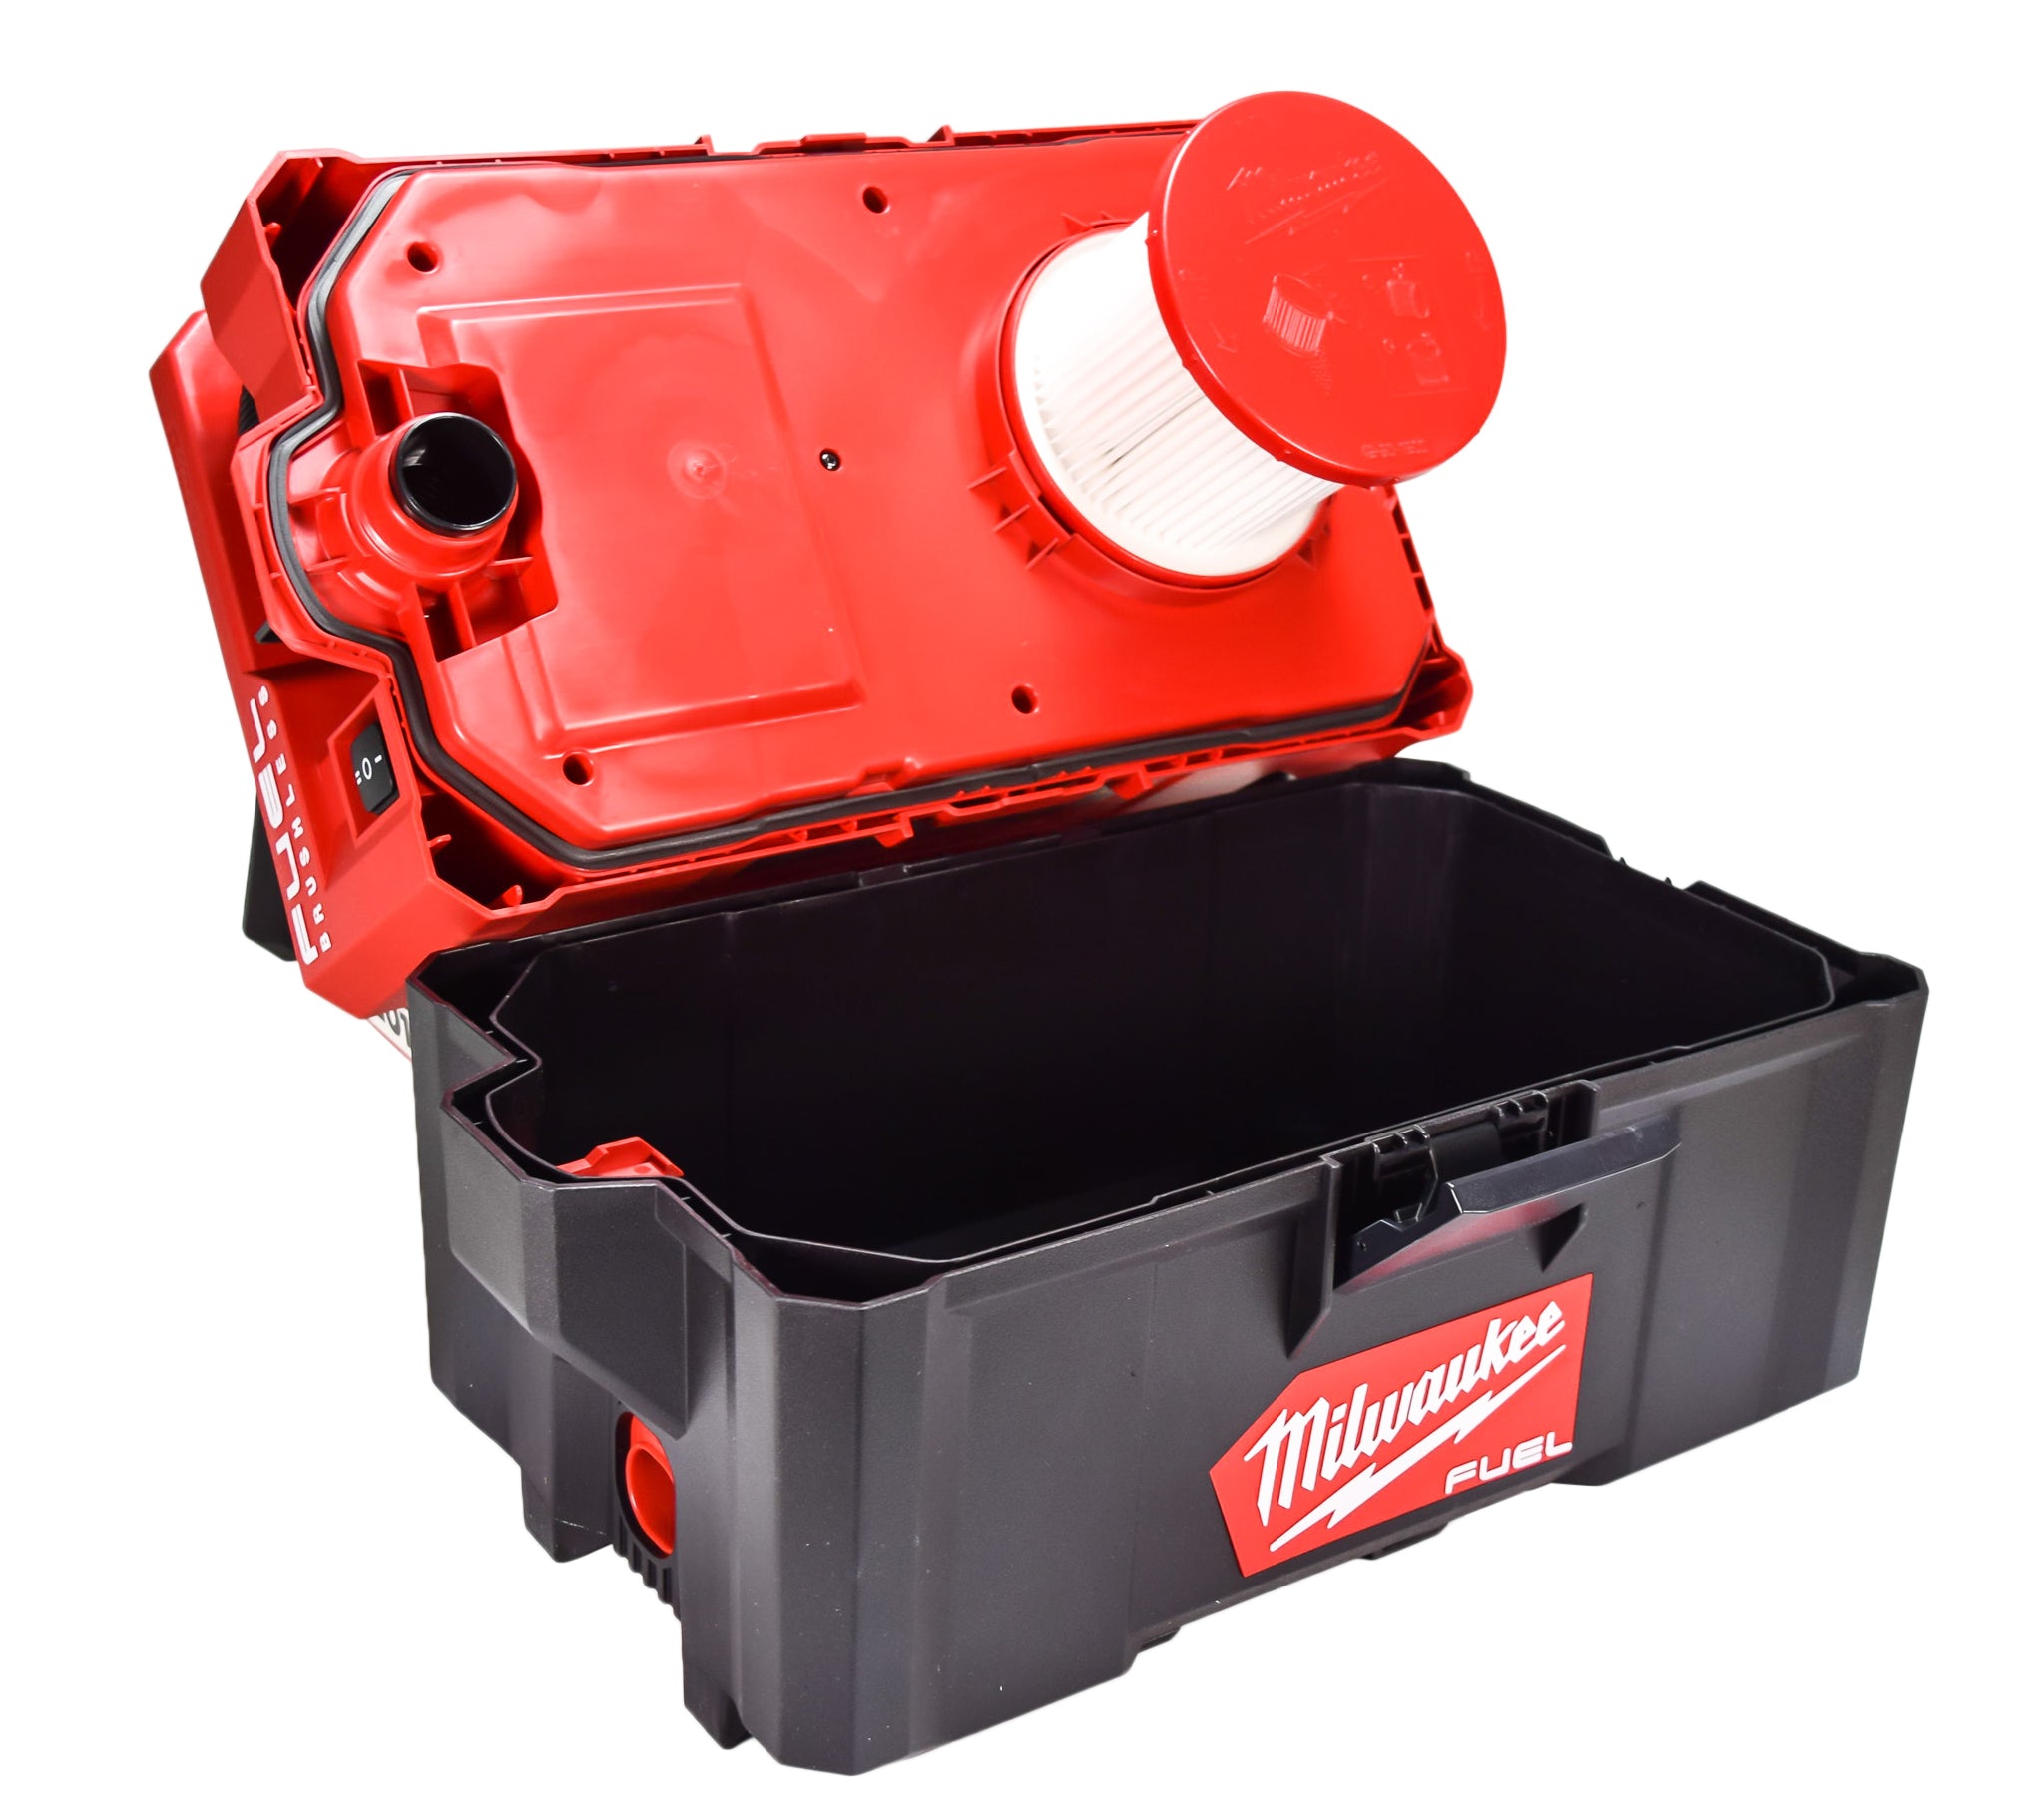 Milwaukee 0970-20 M18 Fuel PACKOUT 2.5 Gallon Wet/Dry Vacuum (Tool Only)